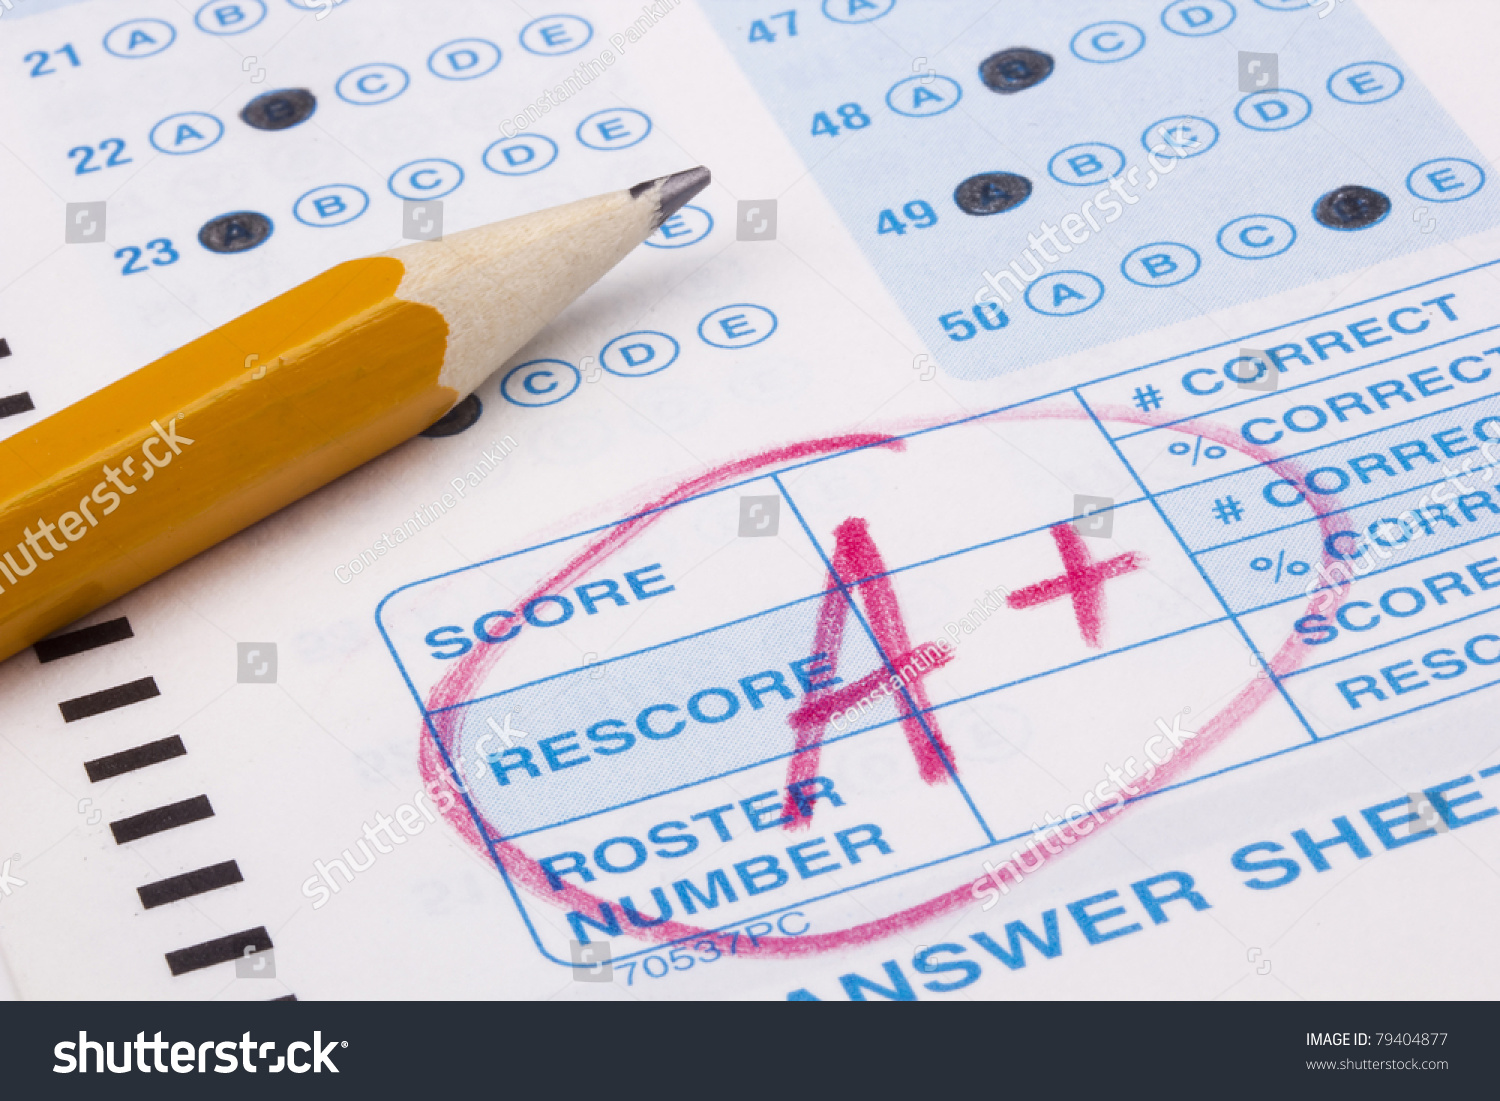 Close-up photograph of a perfect grade on a scantron test. #79404877